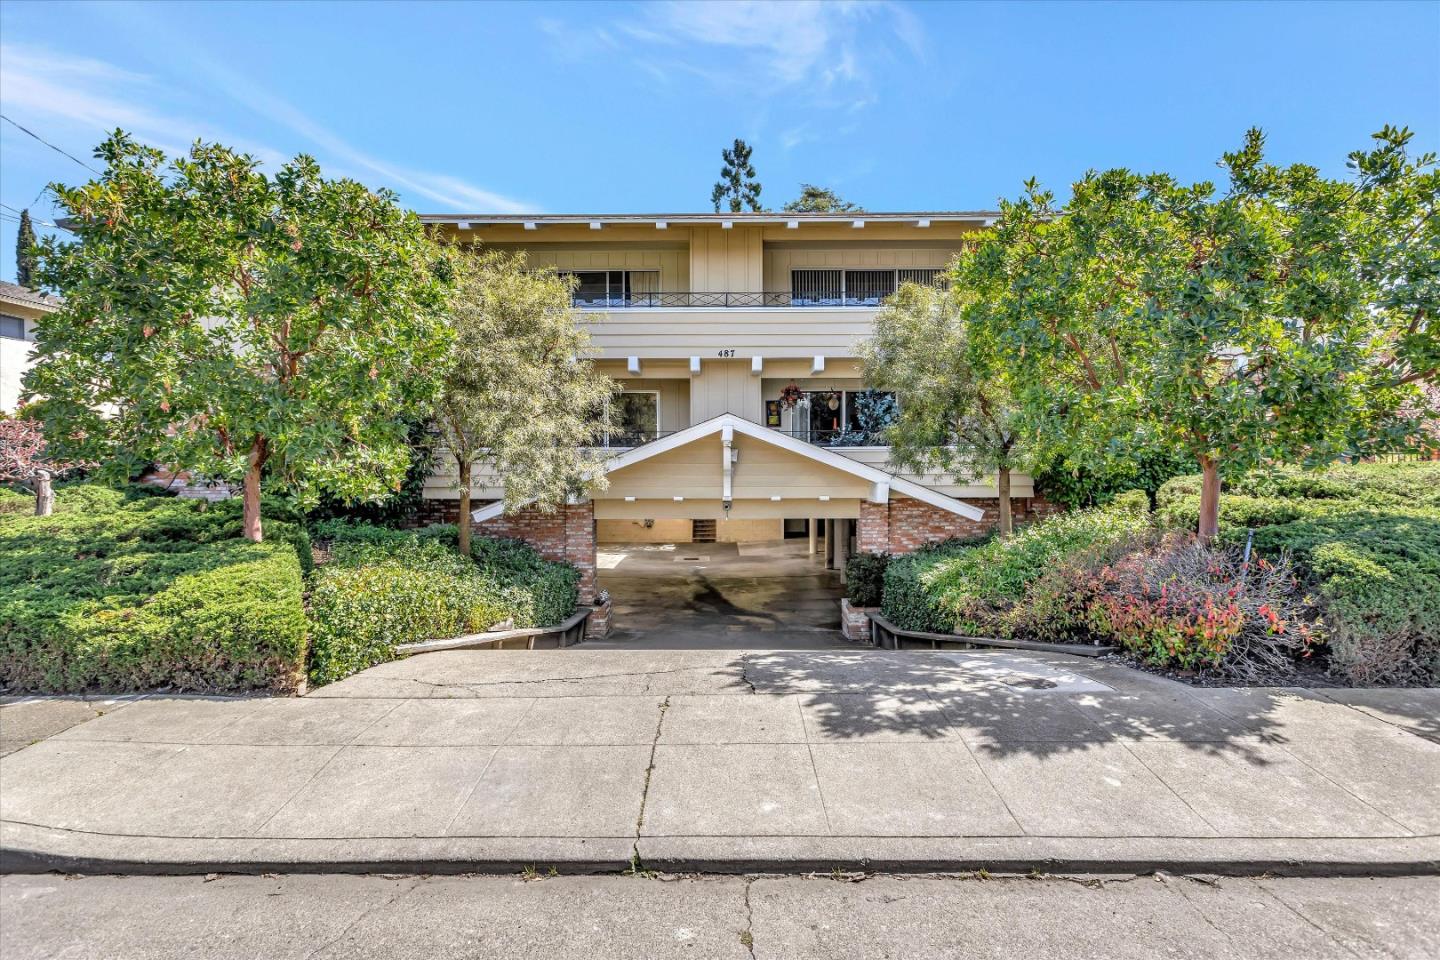 Photo of 487 James Rd in Palo Alto, CA